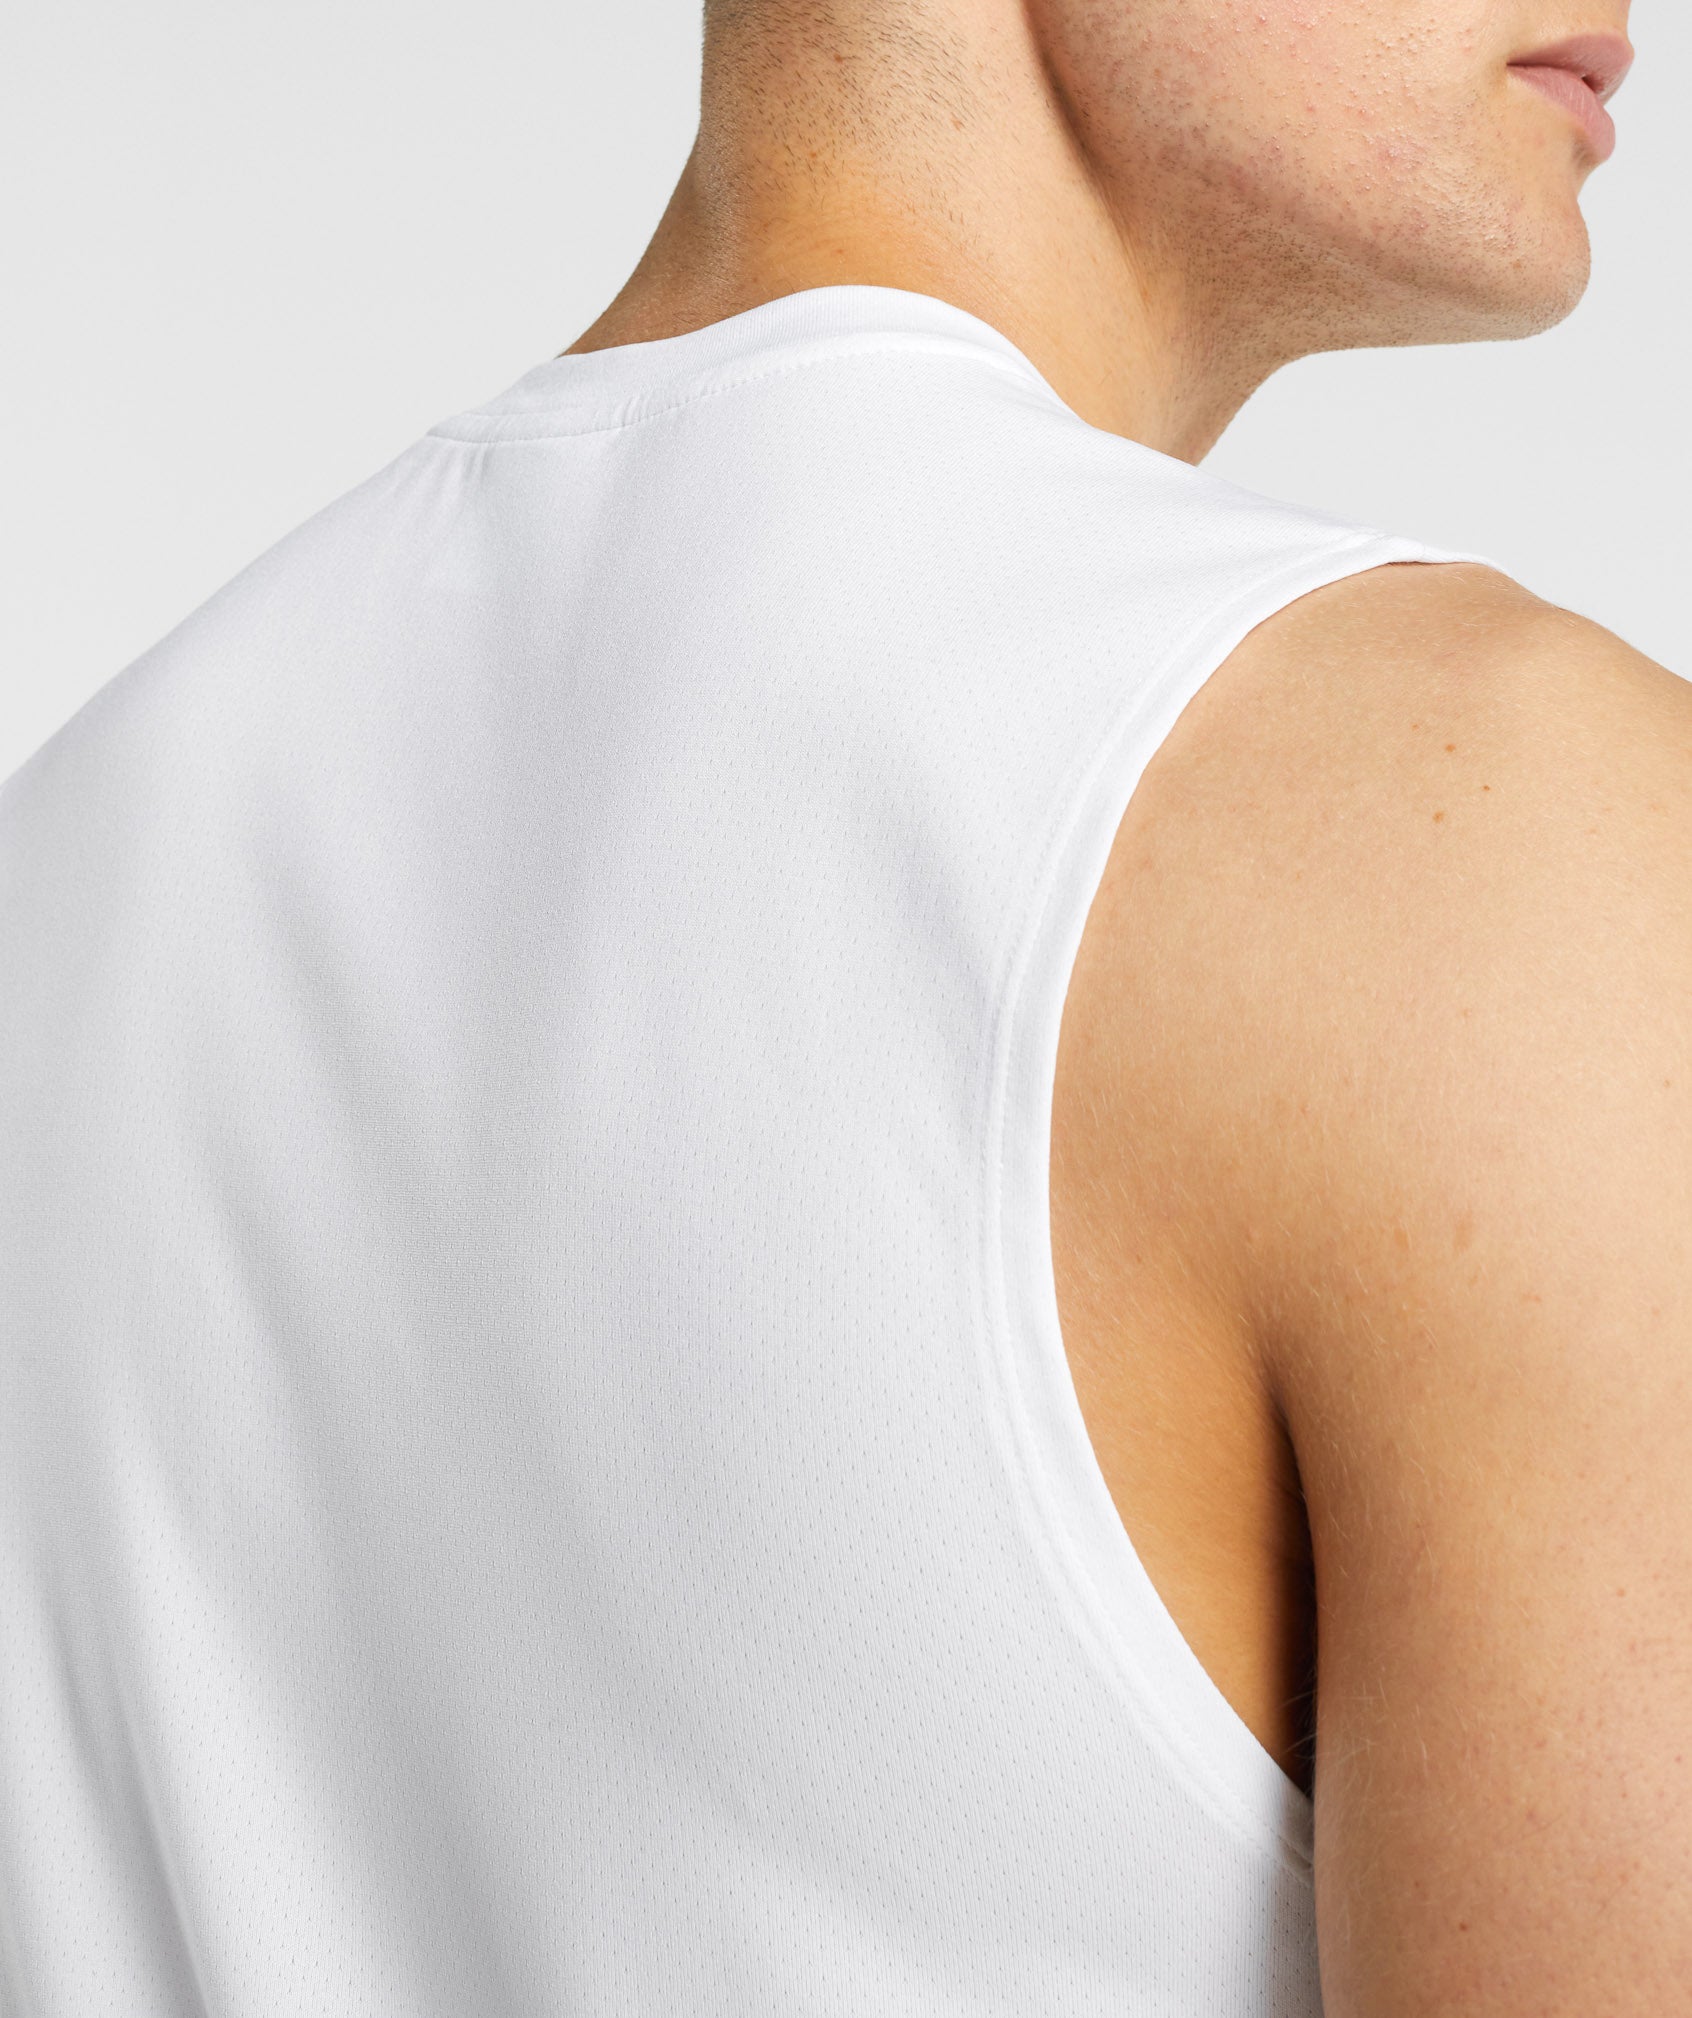 Arrival Sleeveless T-Shirt in White - view 5